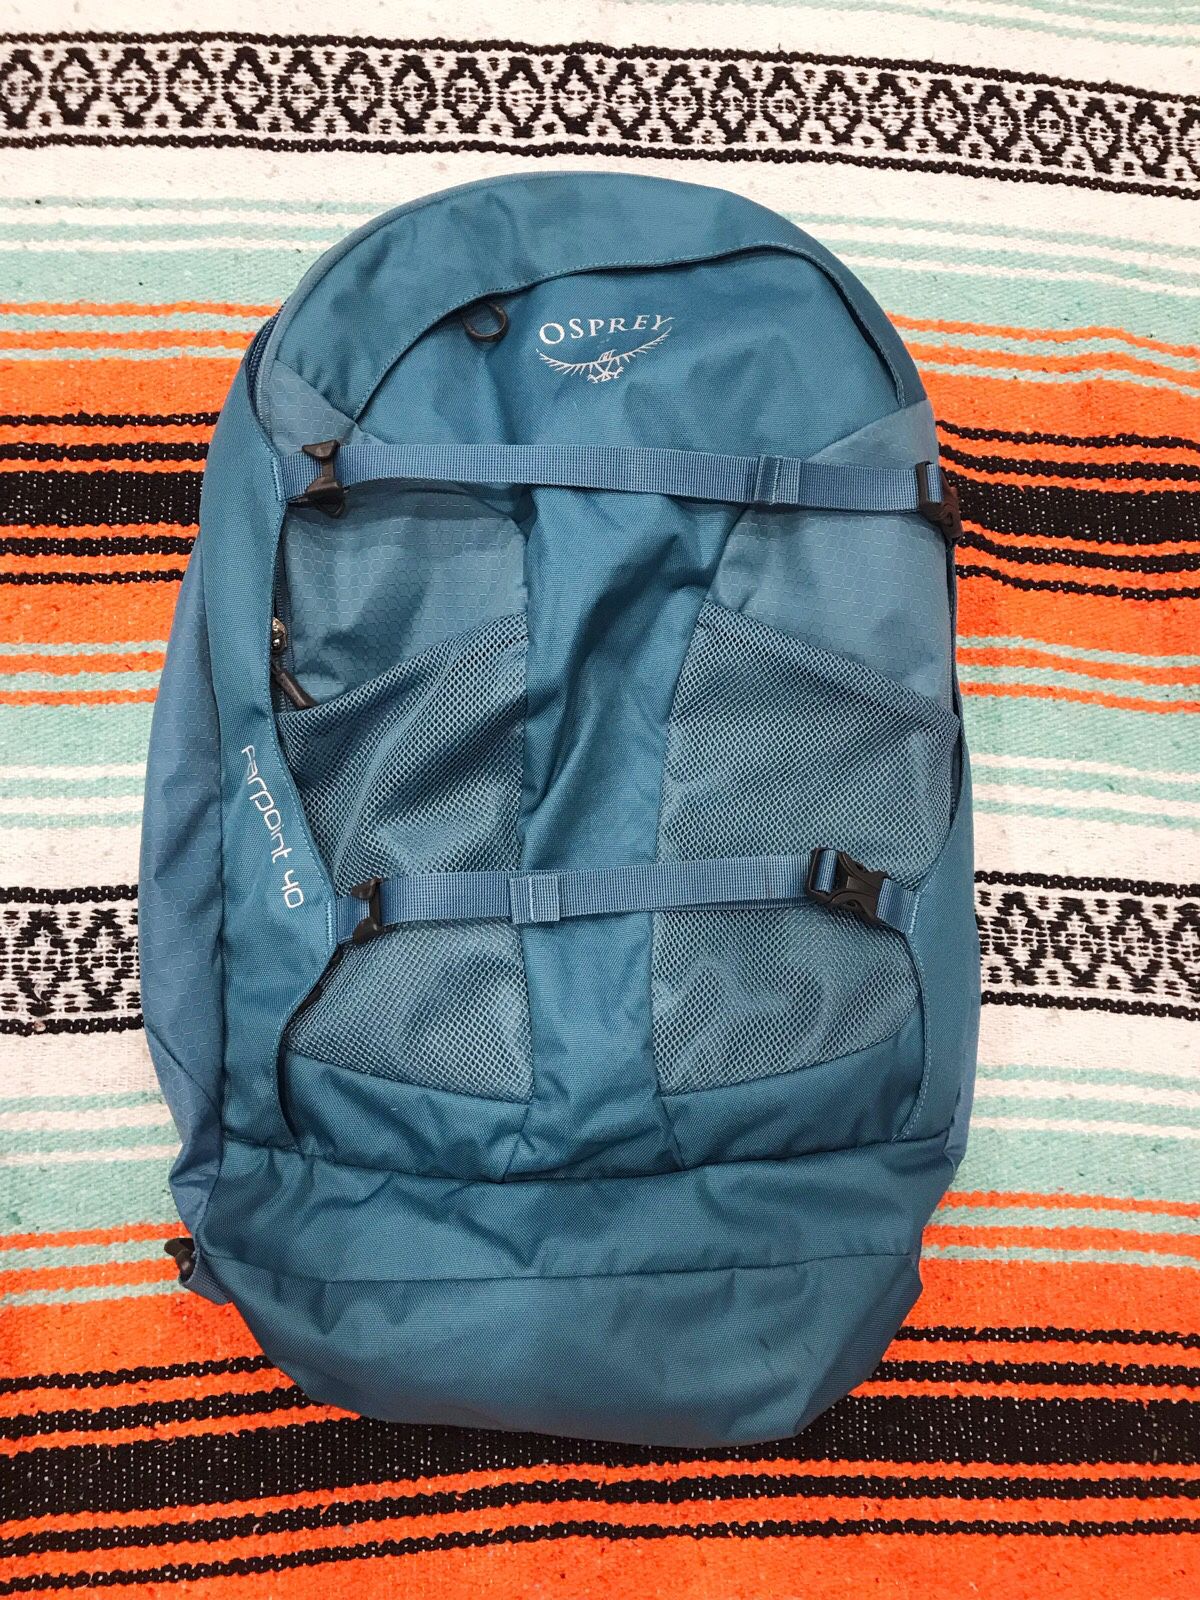 OSPREY Farpoint 40 Travel Backpack Pack Duffle - Blue